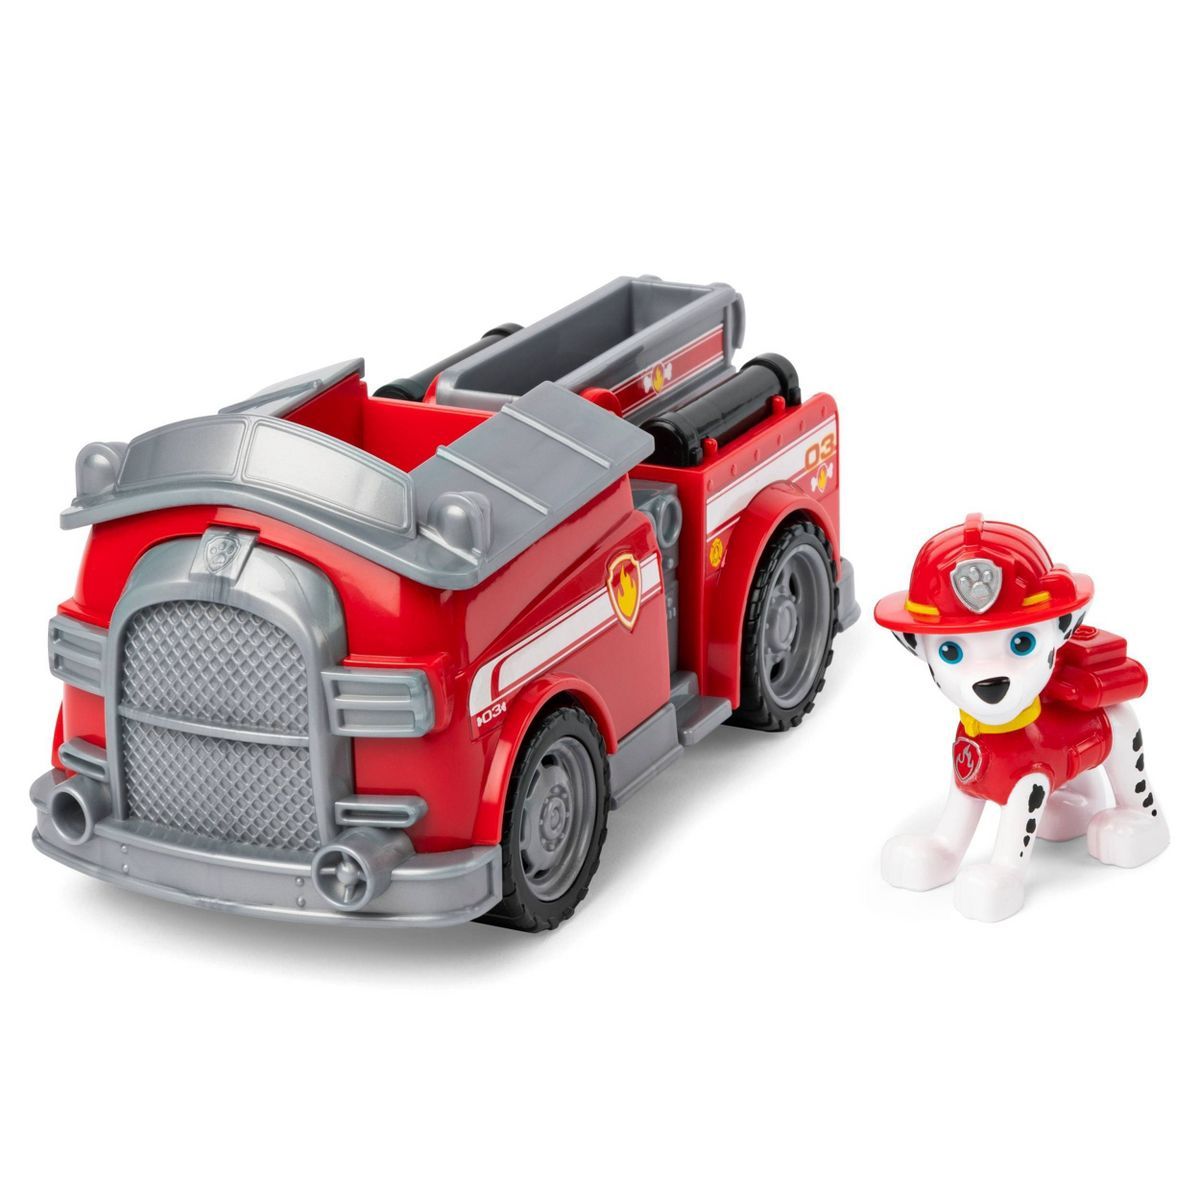 PAW Patrol Fire Engine Vehicle with Marshall | Target